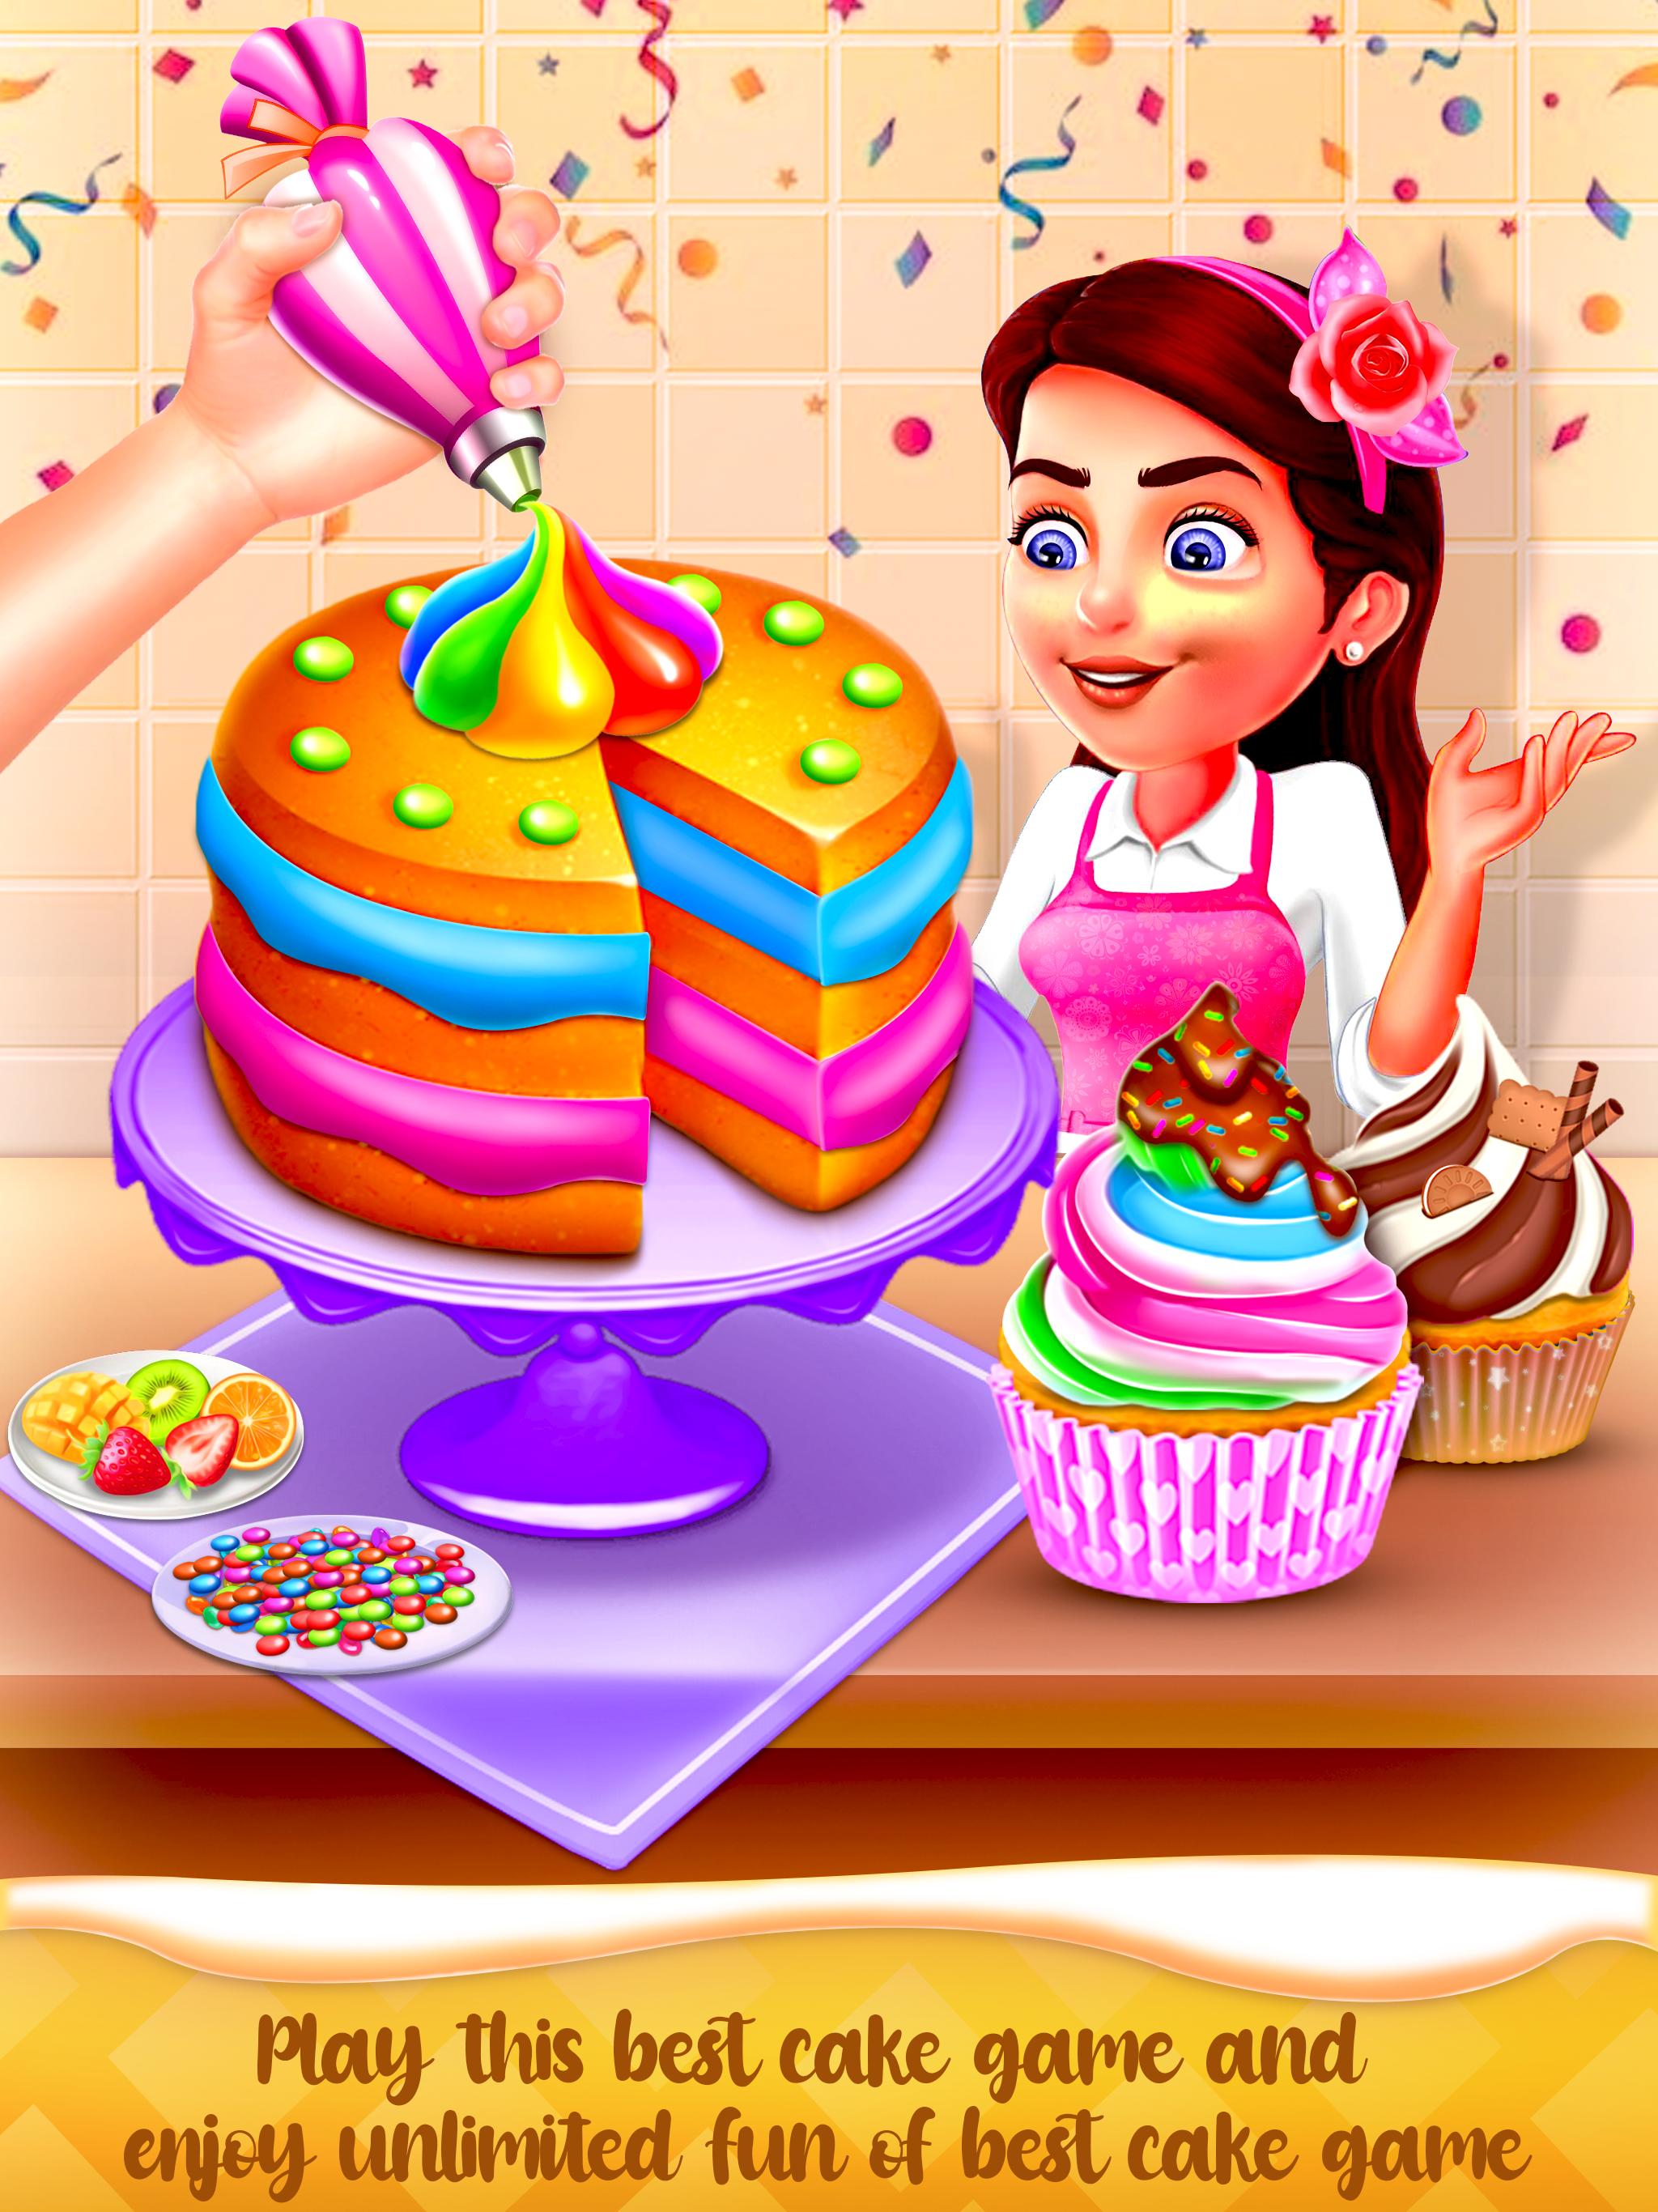 Real Birthday Cake Maker-A Sweet Cake Cooking Game Download